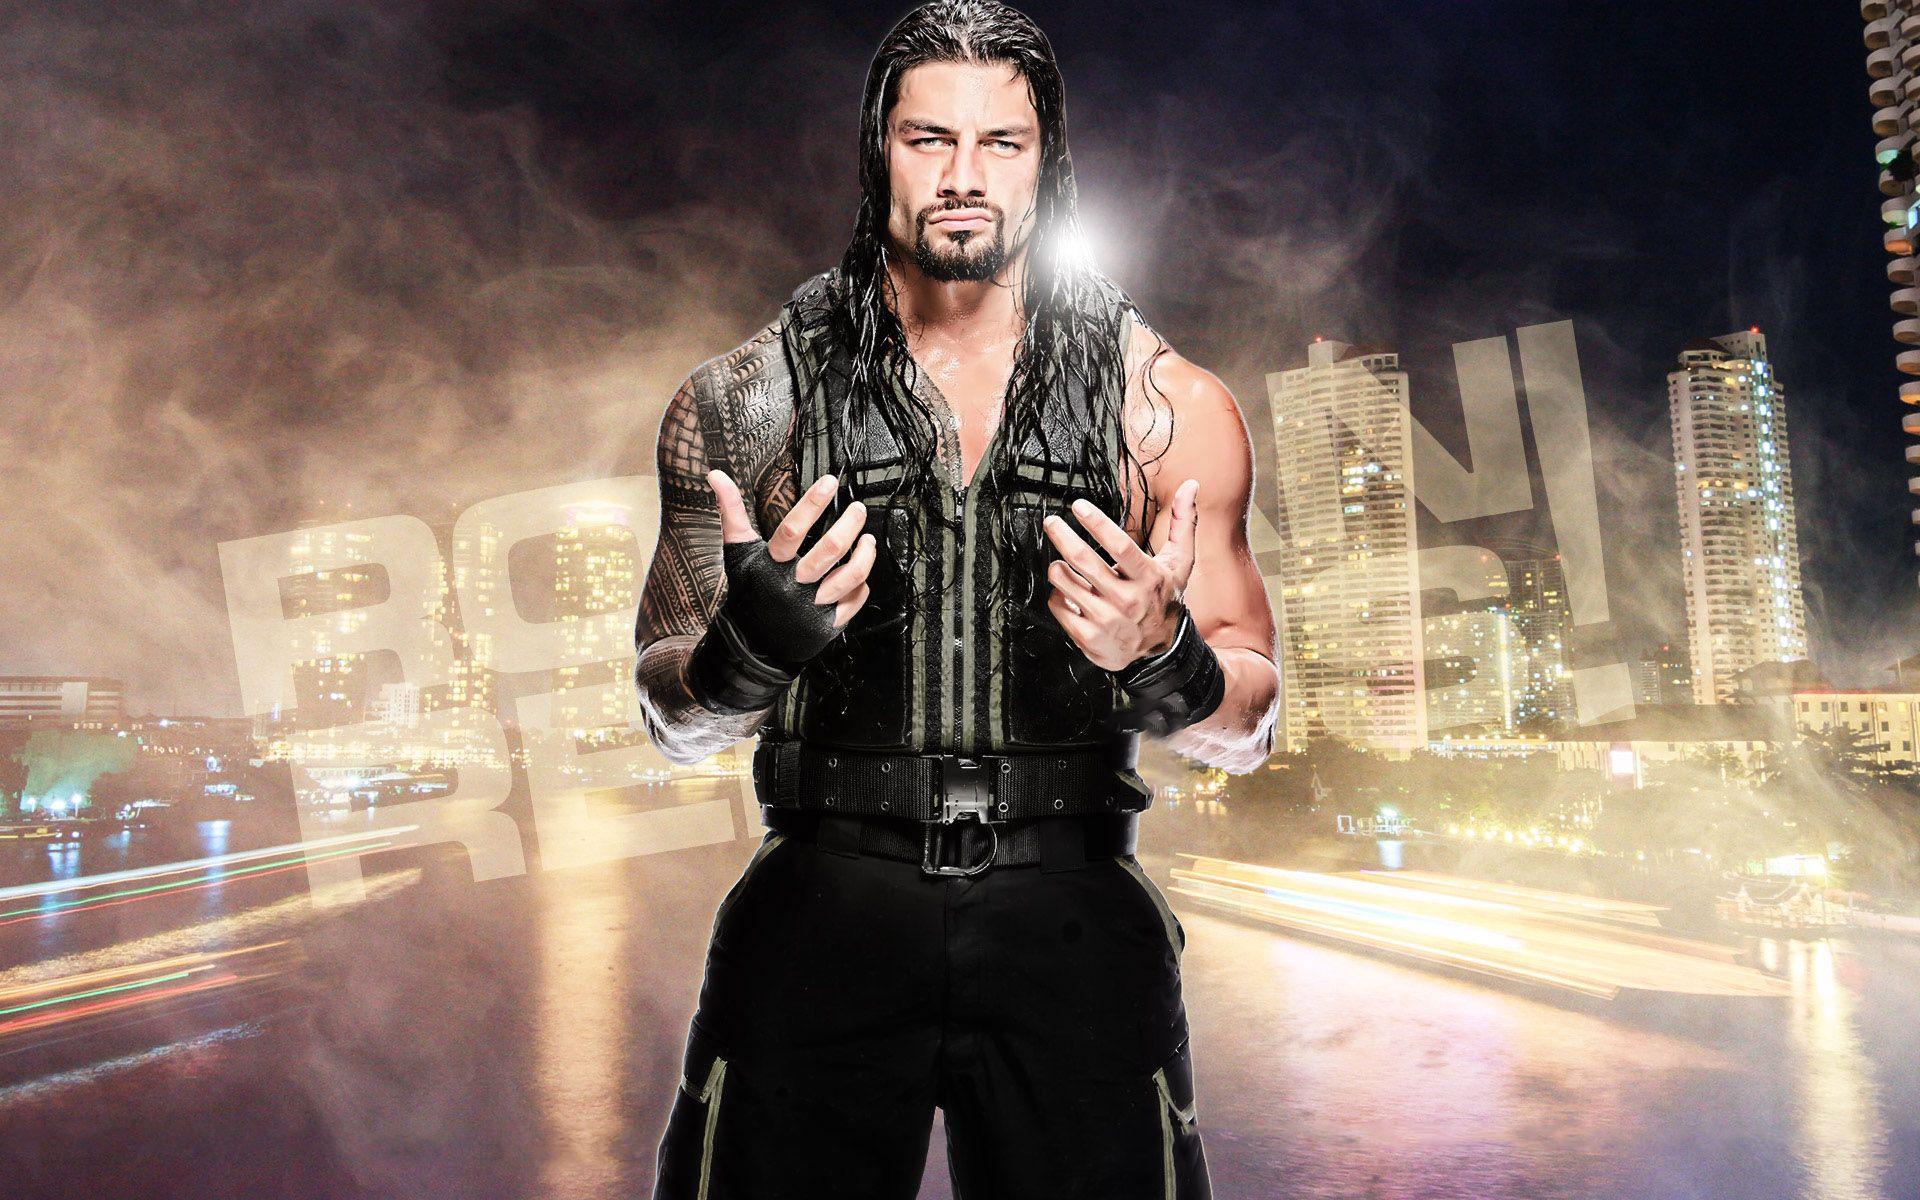 Roman Reigns as a Background. Christmas